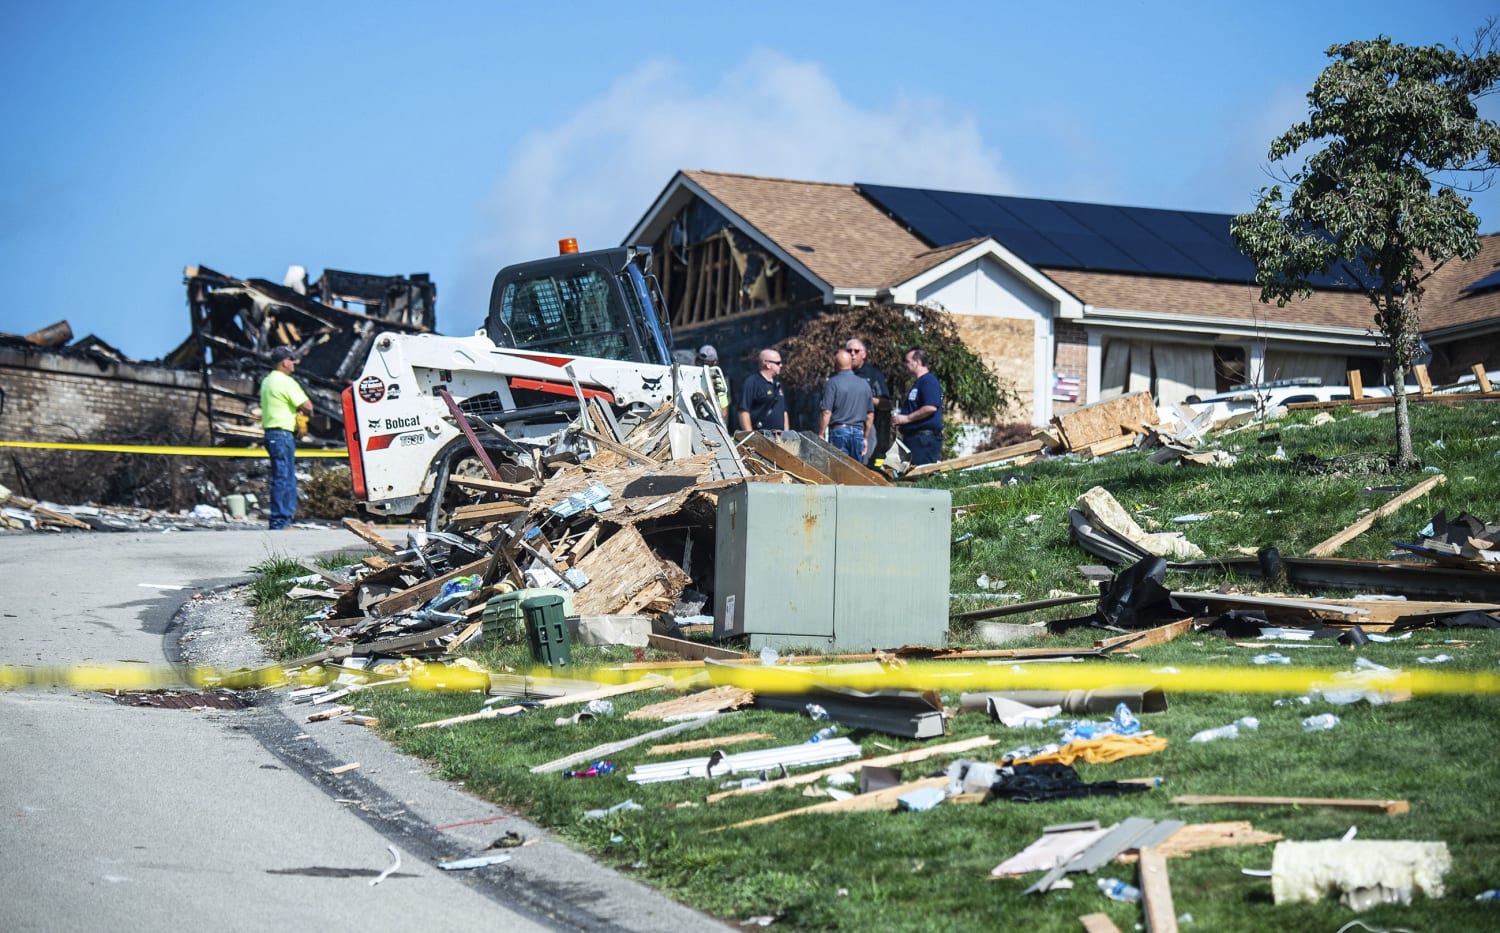 Sixth person dies from injuries days after Pennsylvania house explosion